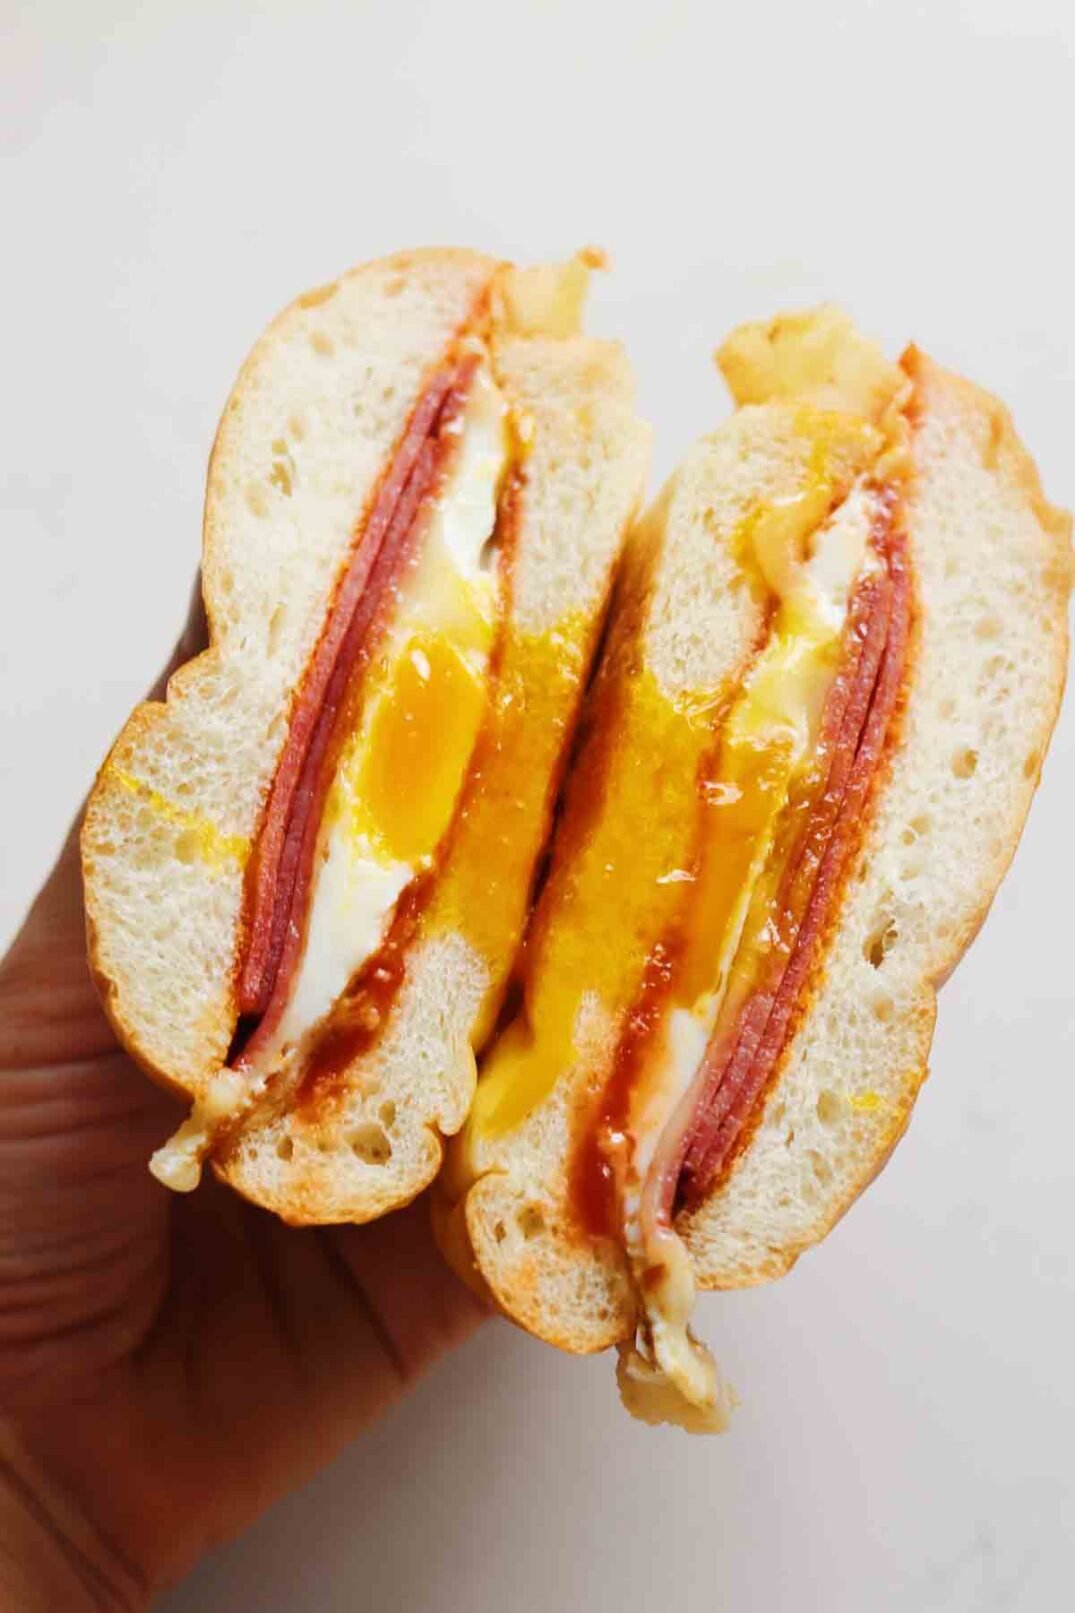 a hand holding a split open pork roll egg and cheese sandwich over a white background.